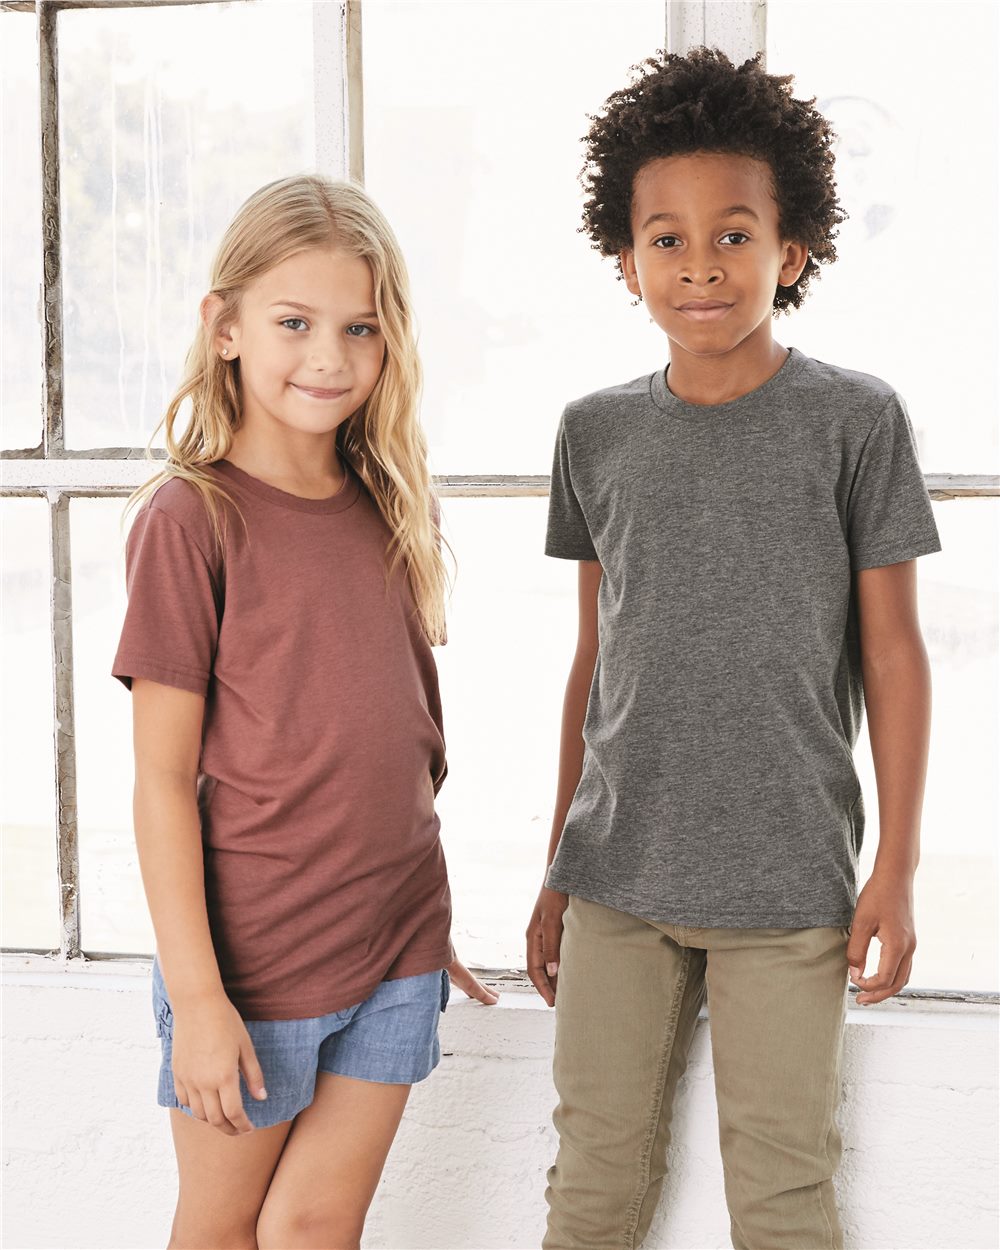 All Kid's Clothing